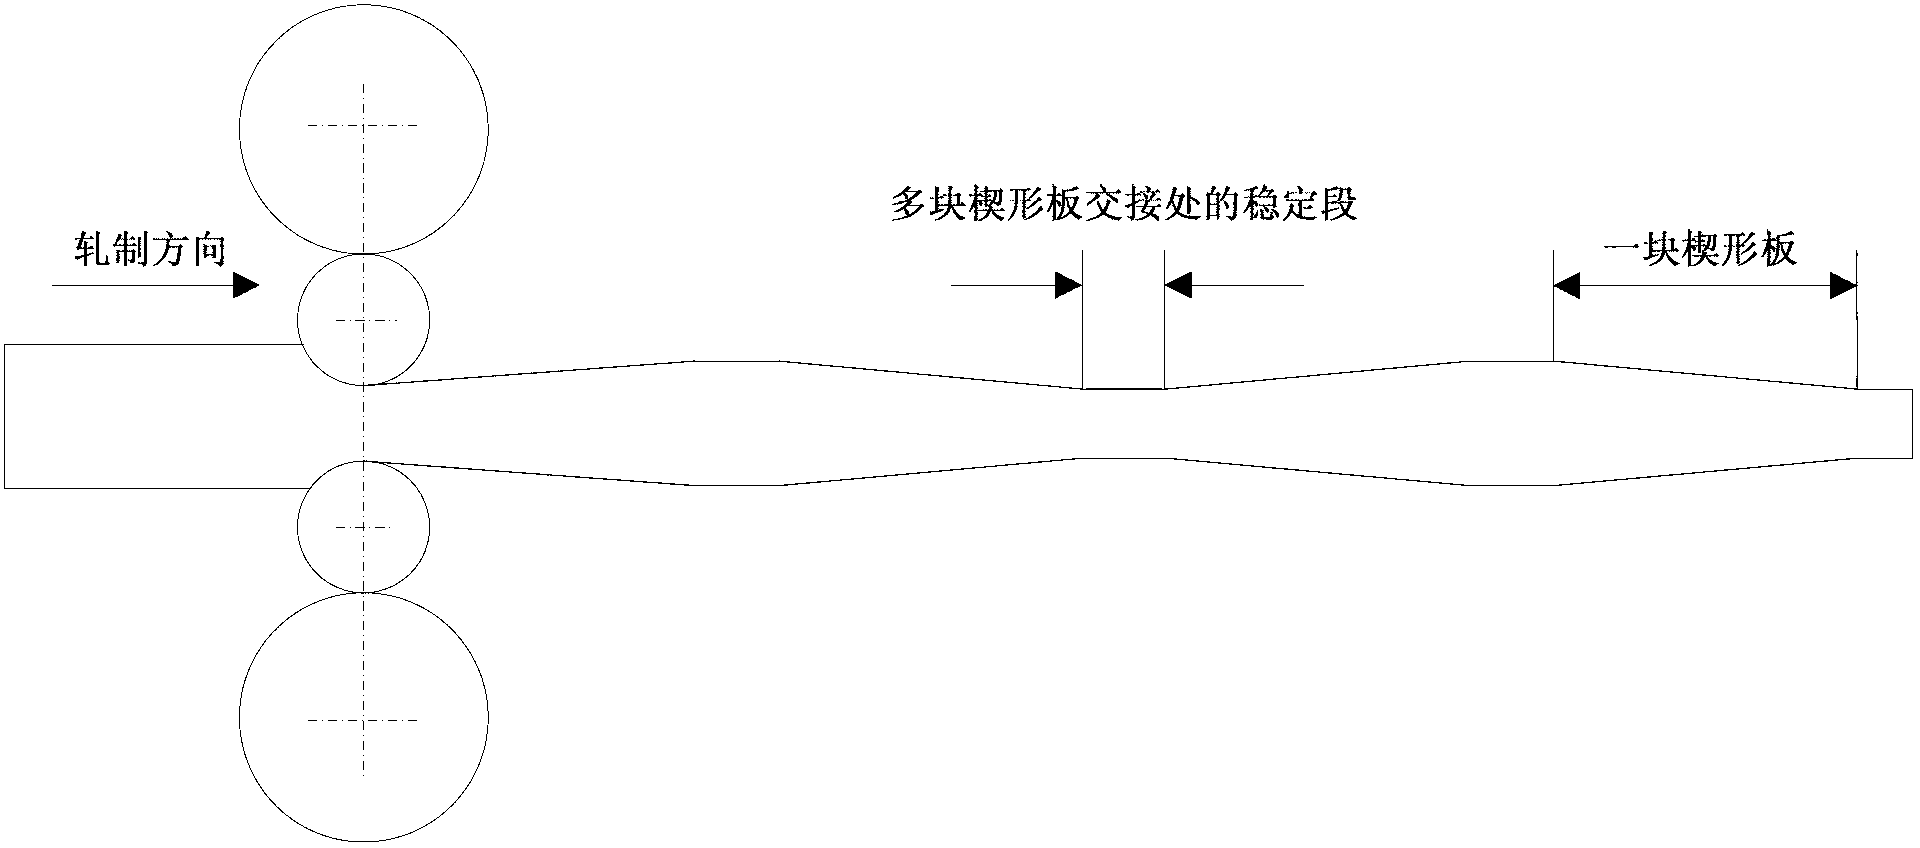 Production method of transverse wedge-shaped rolled thickness-variable steel plate